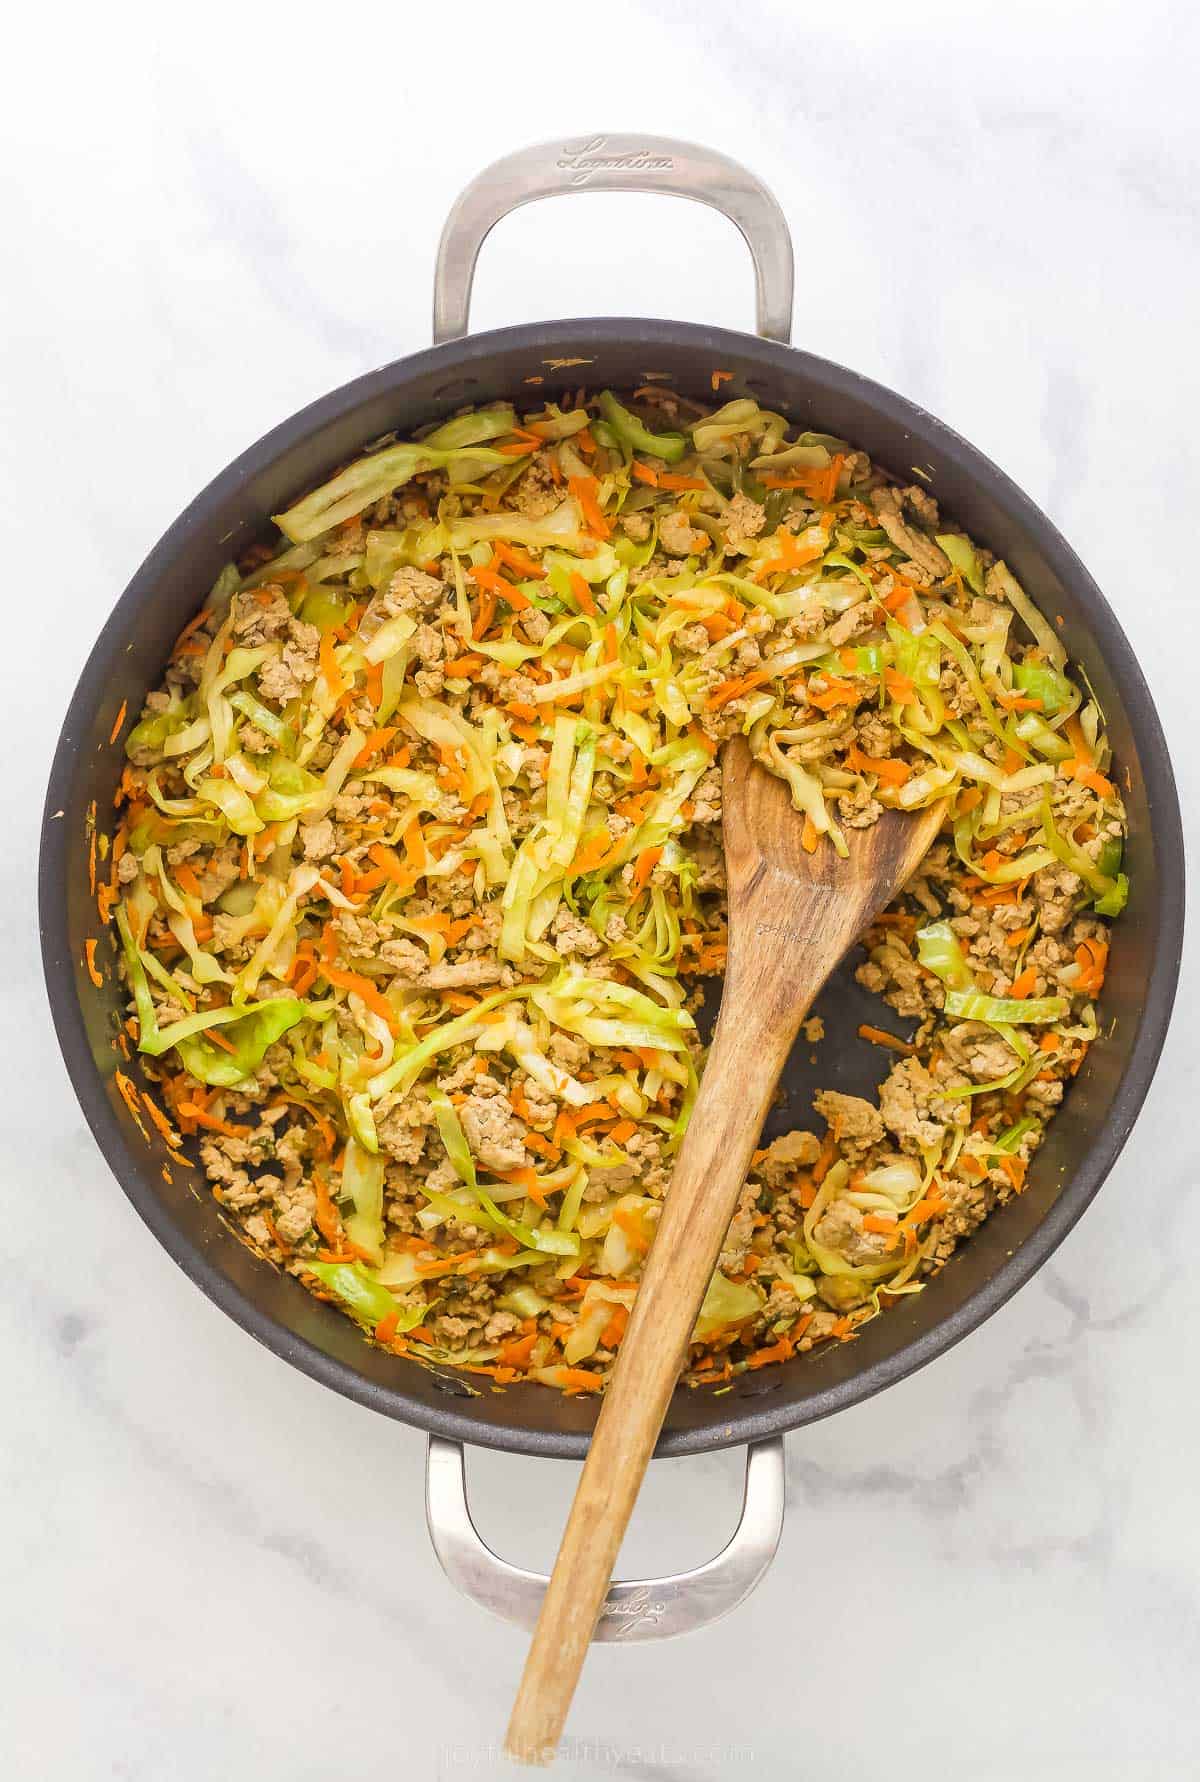 egg roll in a bowl ingredients in a pan like ground turkey, cabbage, and carrots